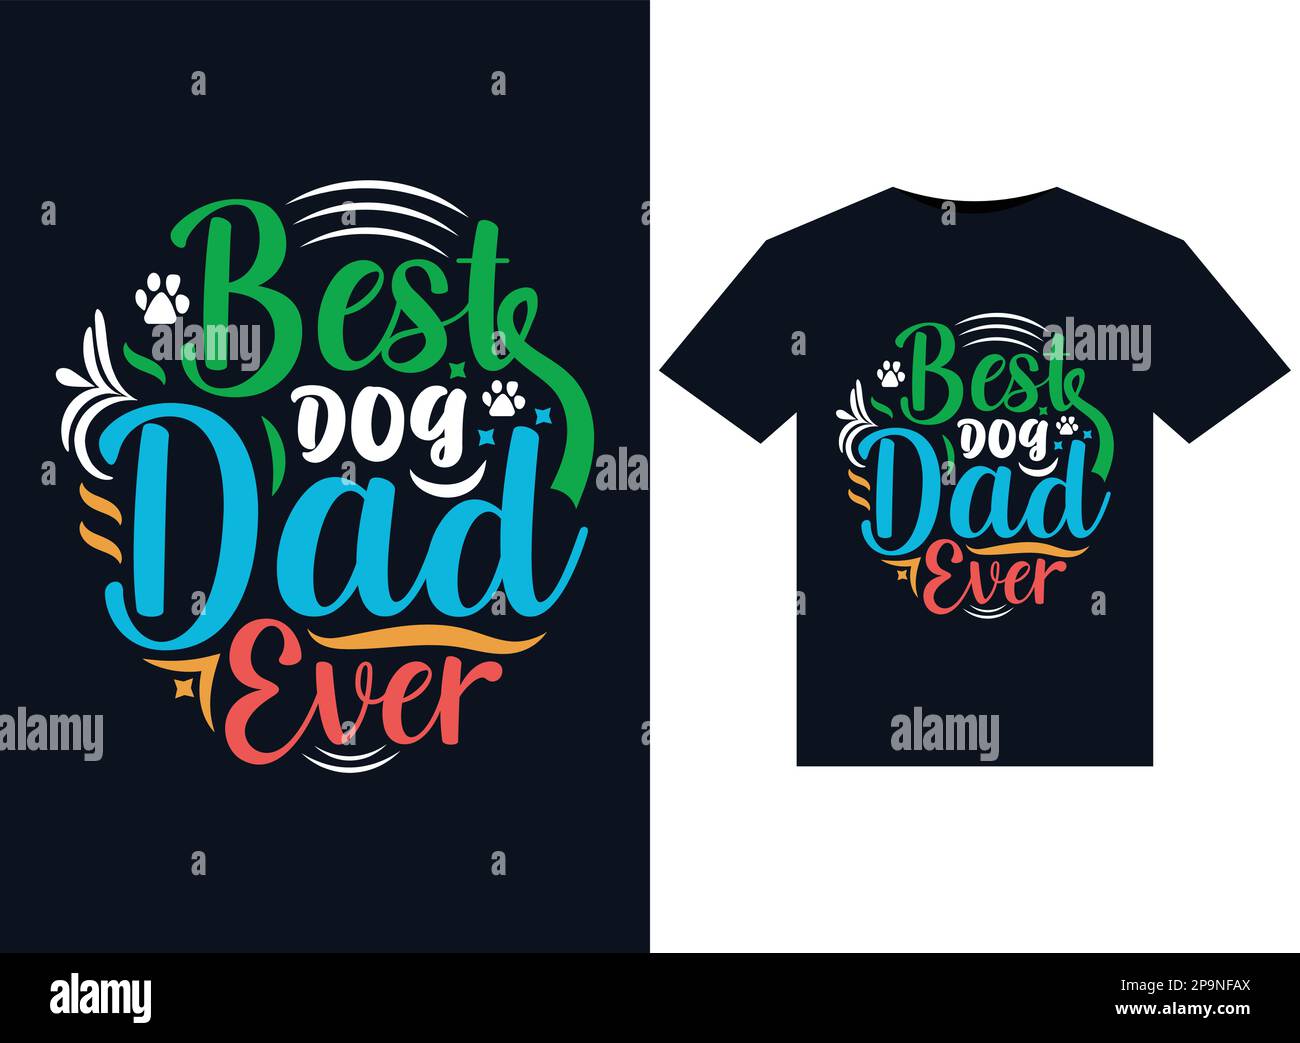 Best Dog Dad Ever Vector for print-ready T-Shirts design Stock Vector